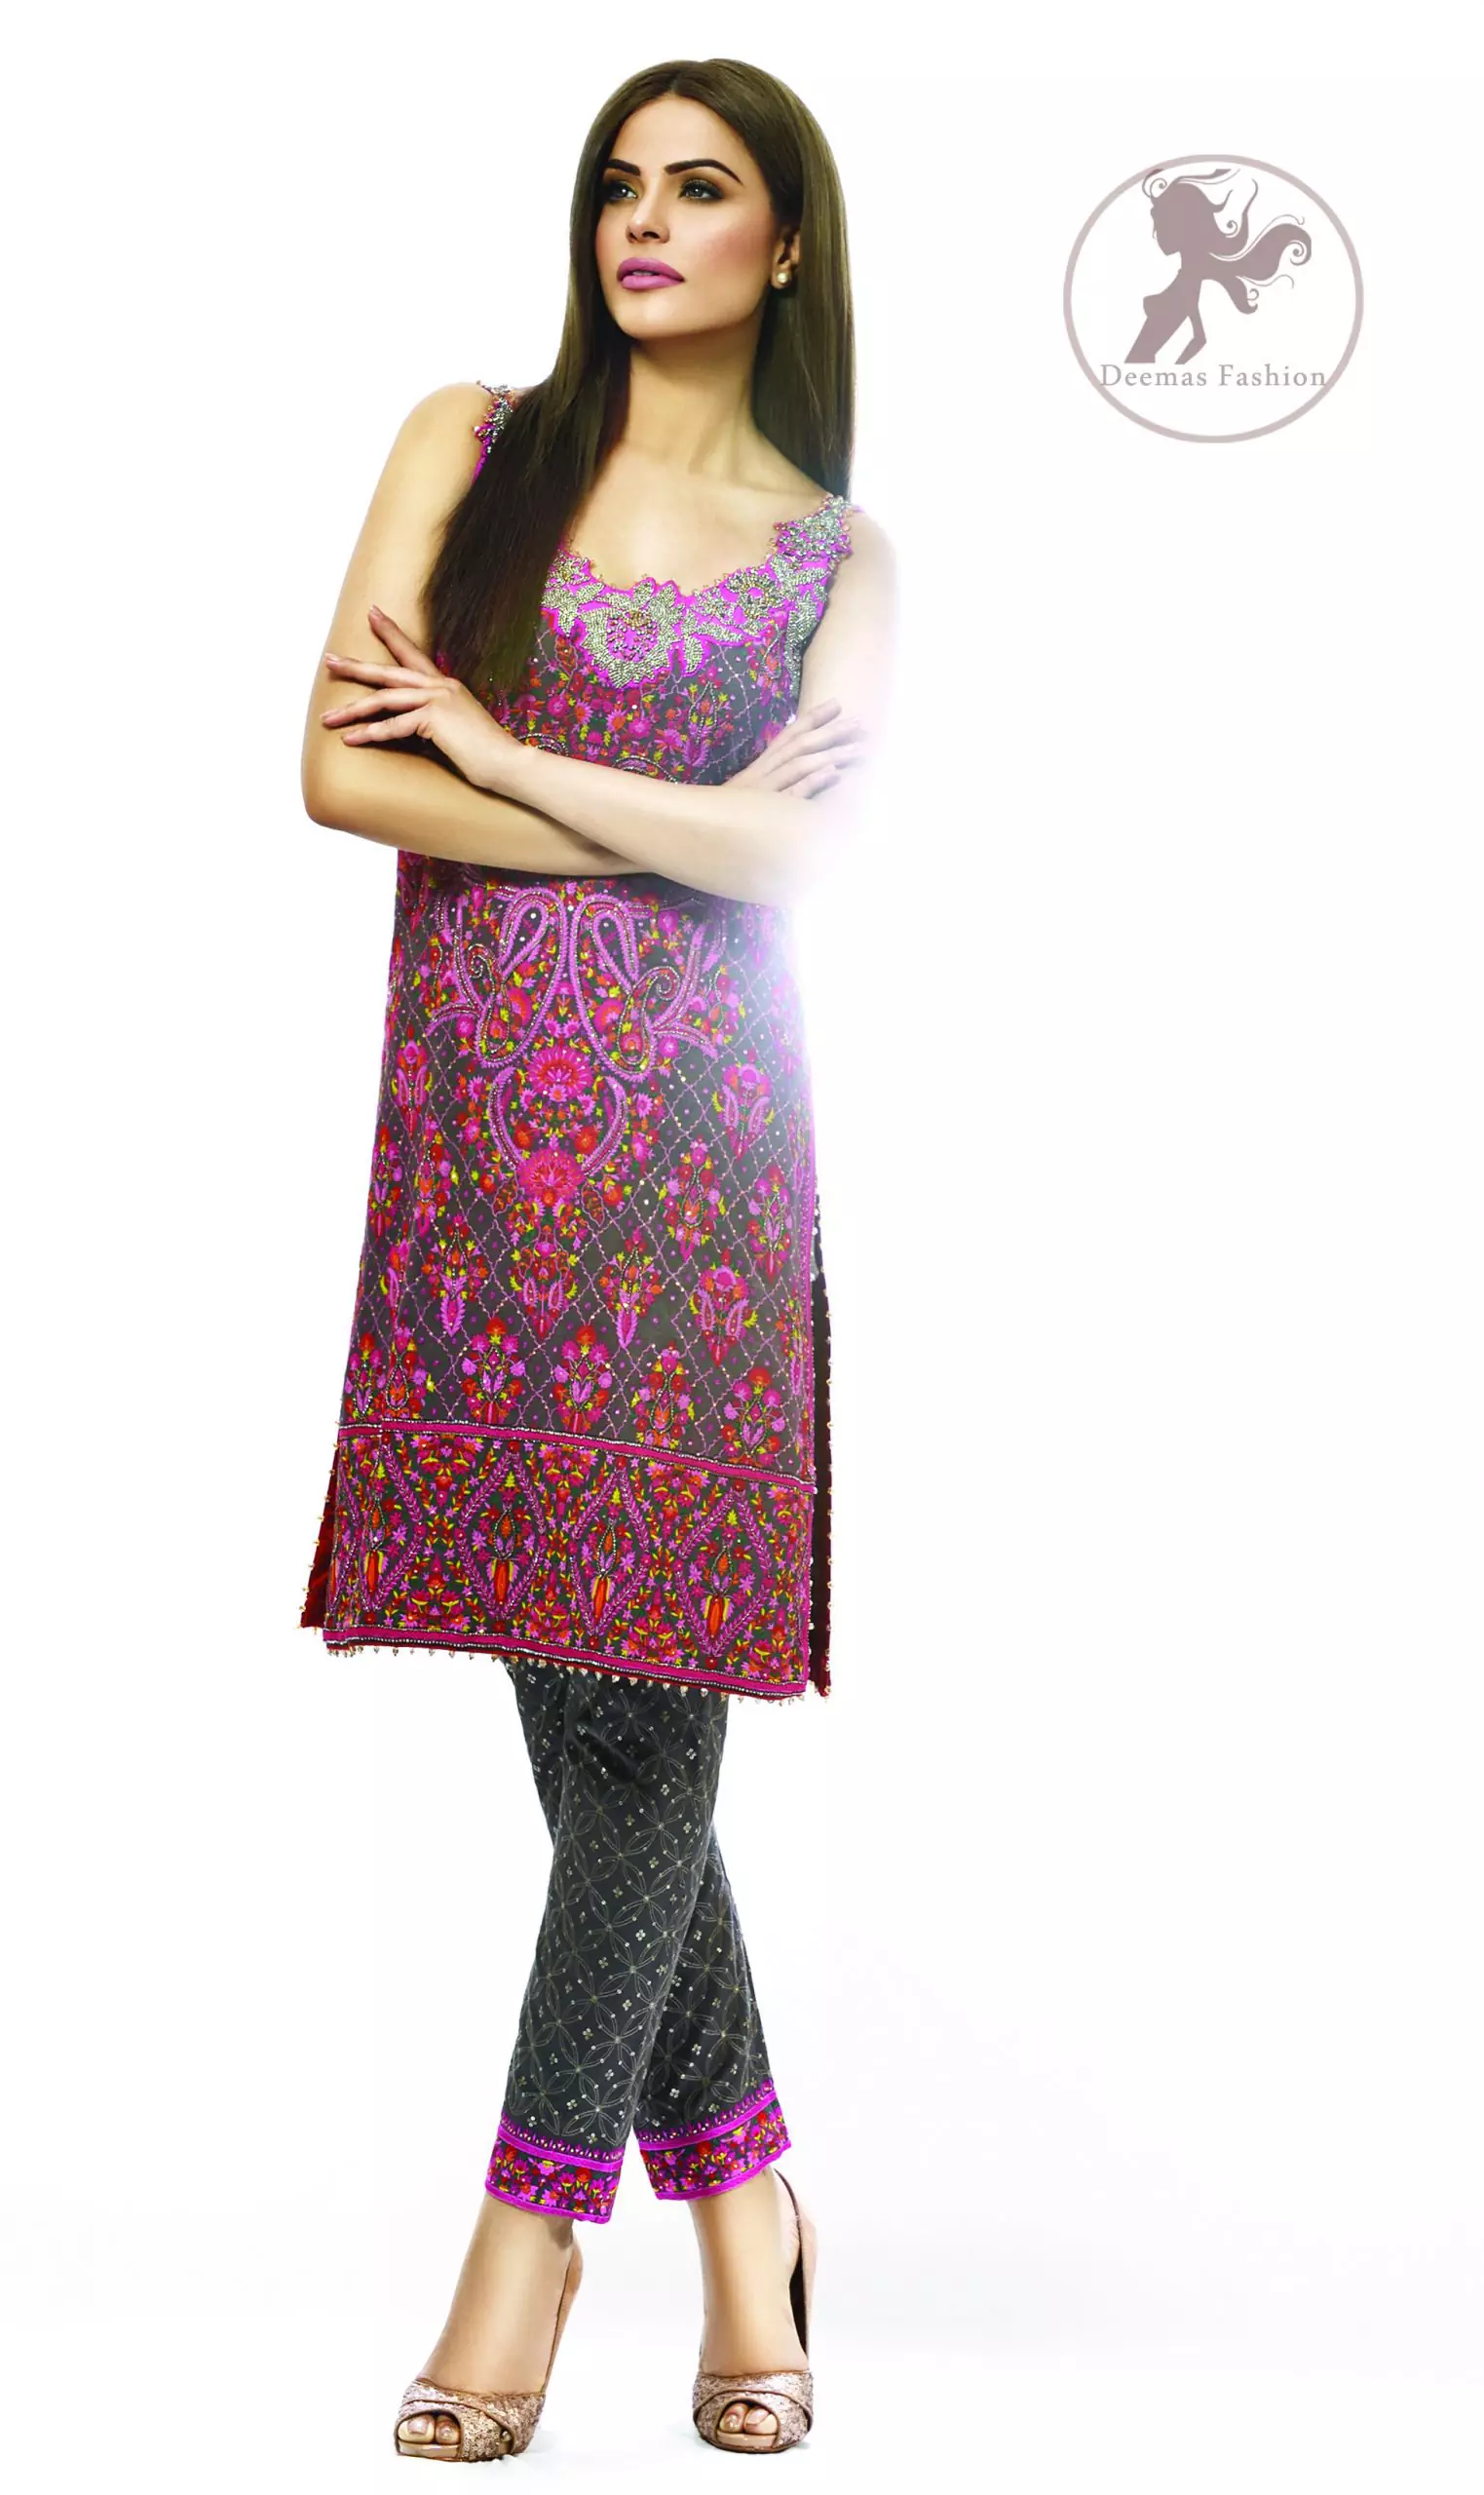 This dress is beautifully sculptured with floral embroidery, adorned with crisscross pattern, colorful embellishments and zerdozi work. The detailed geometric border gives a perfect ending to this shirt.  Having sleeveless sleeves and small sprinkled motifs on shirt. Paired up with cigarette pants which is designed in crisscross pattern. It comprises with magenta chiffon dupatta.